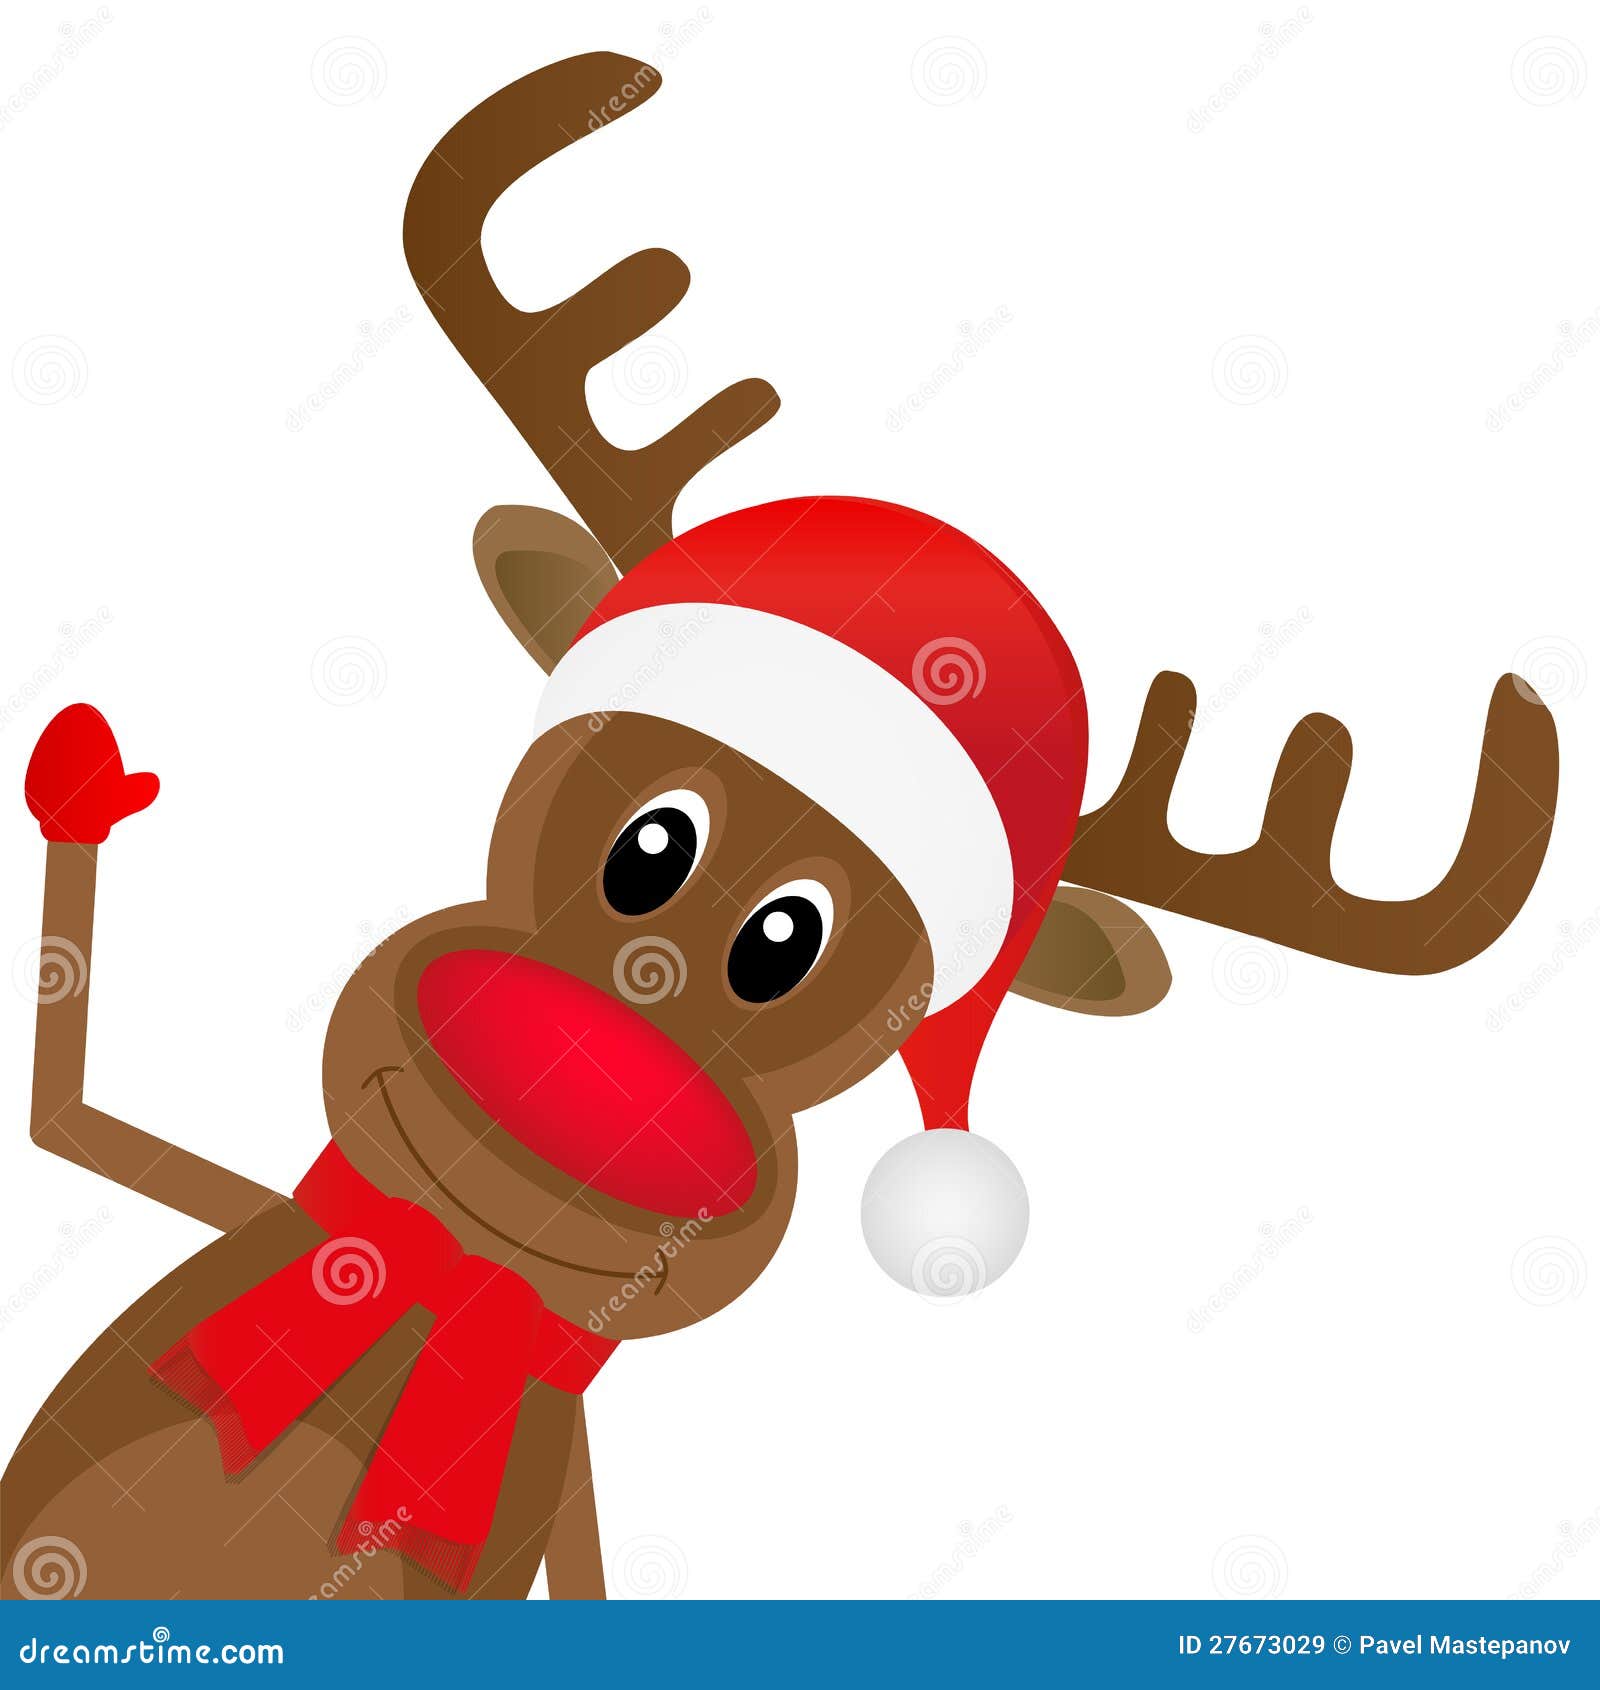 Christmas Reindeer Royalty Free Stock Images - Image: 27673029